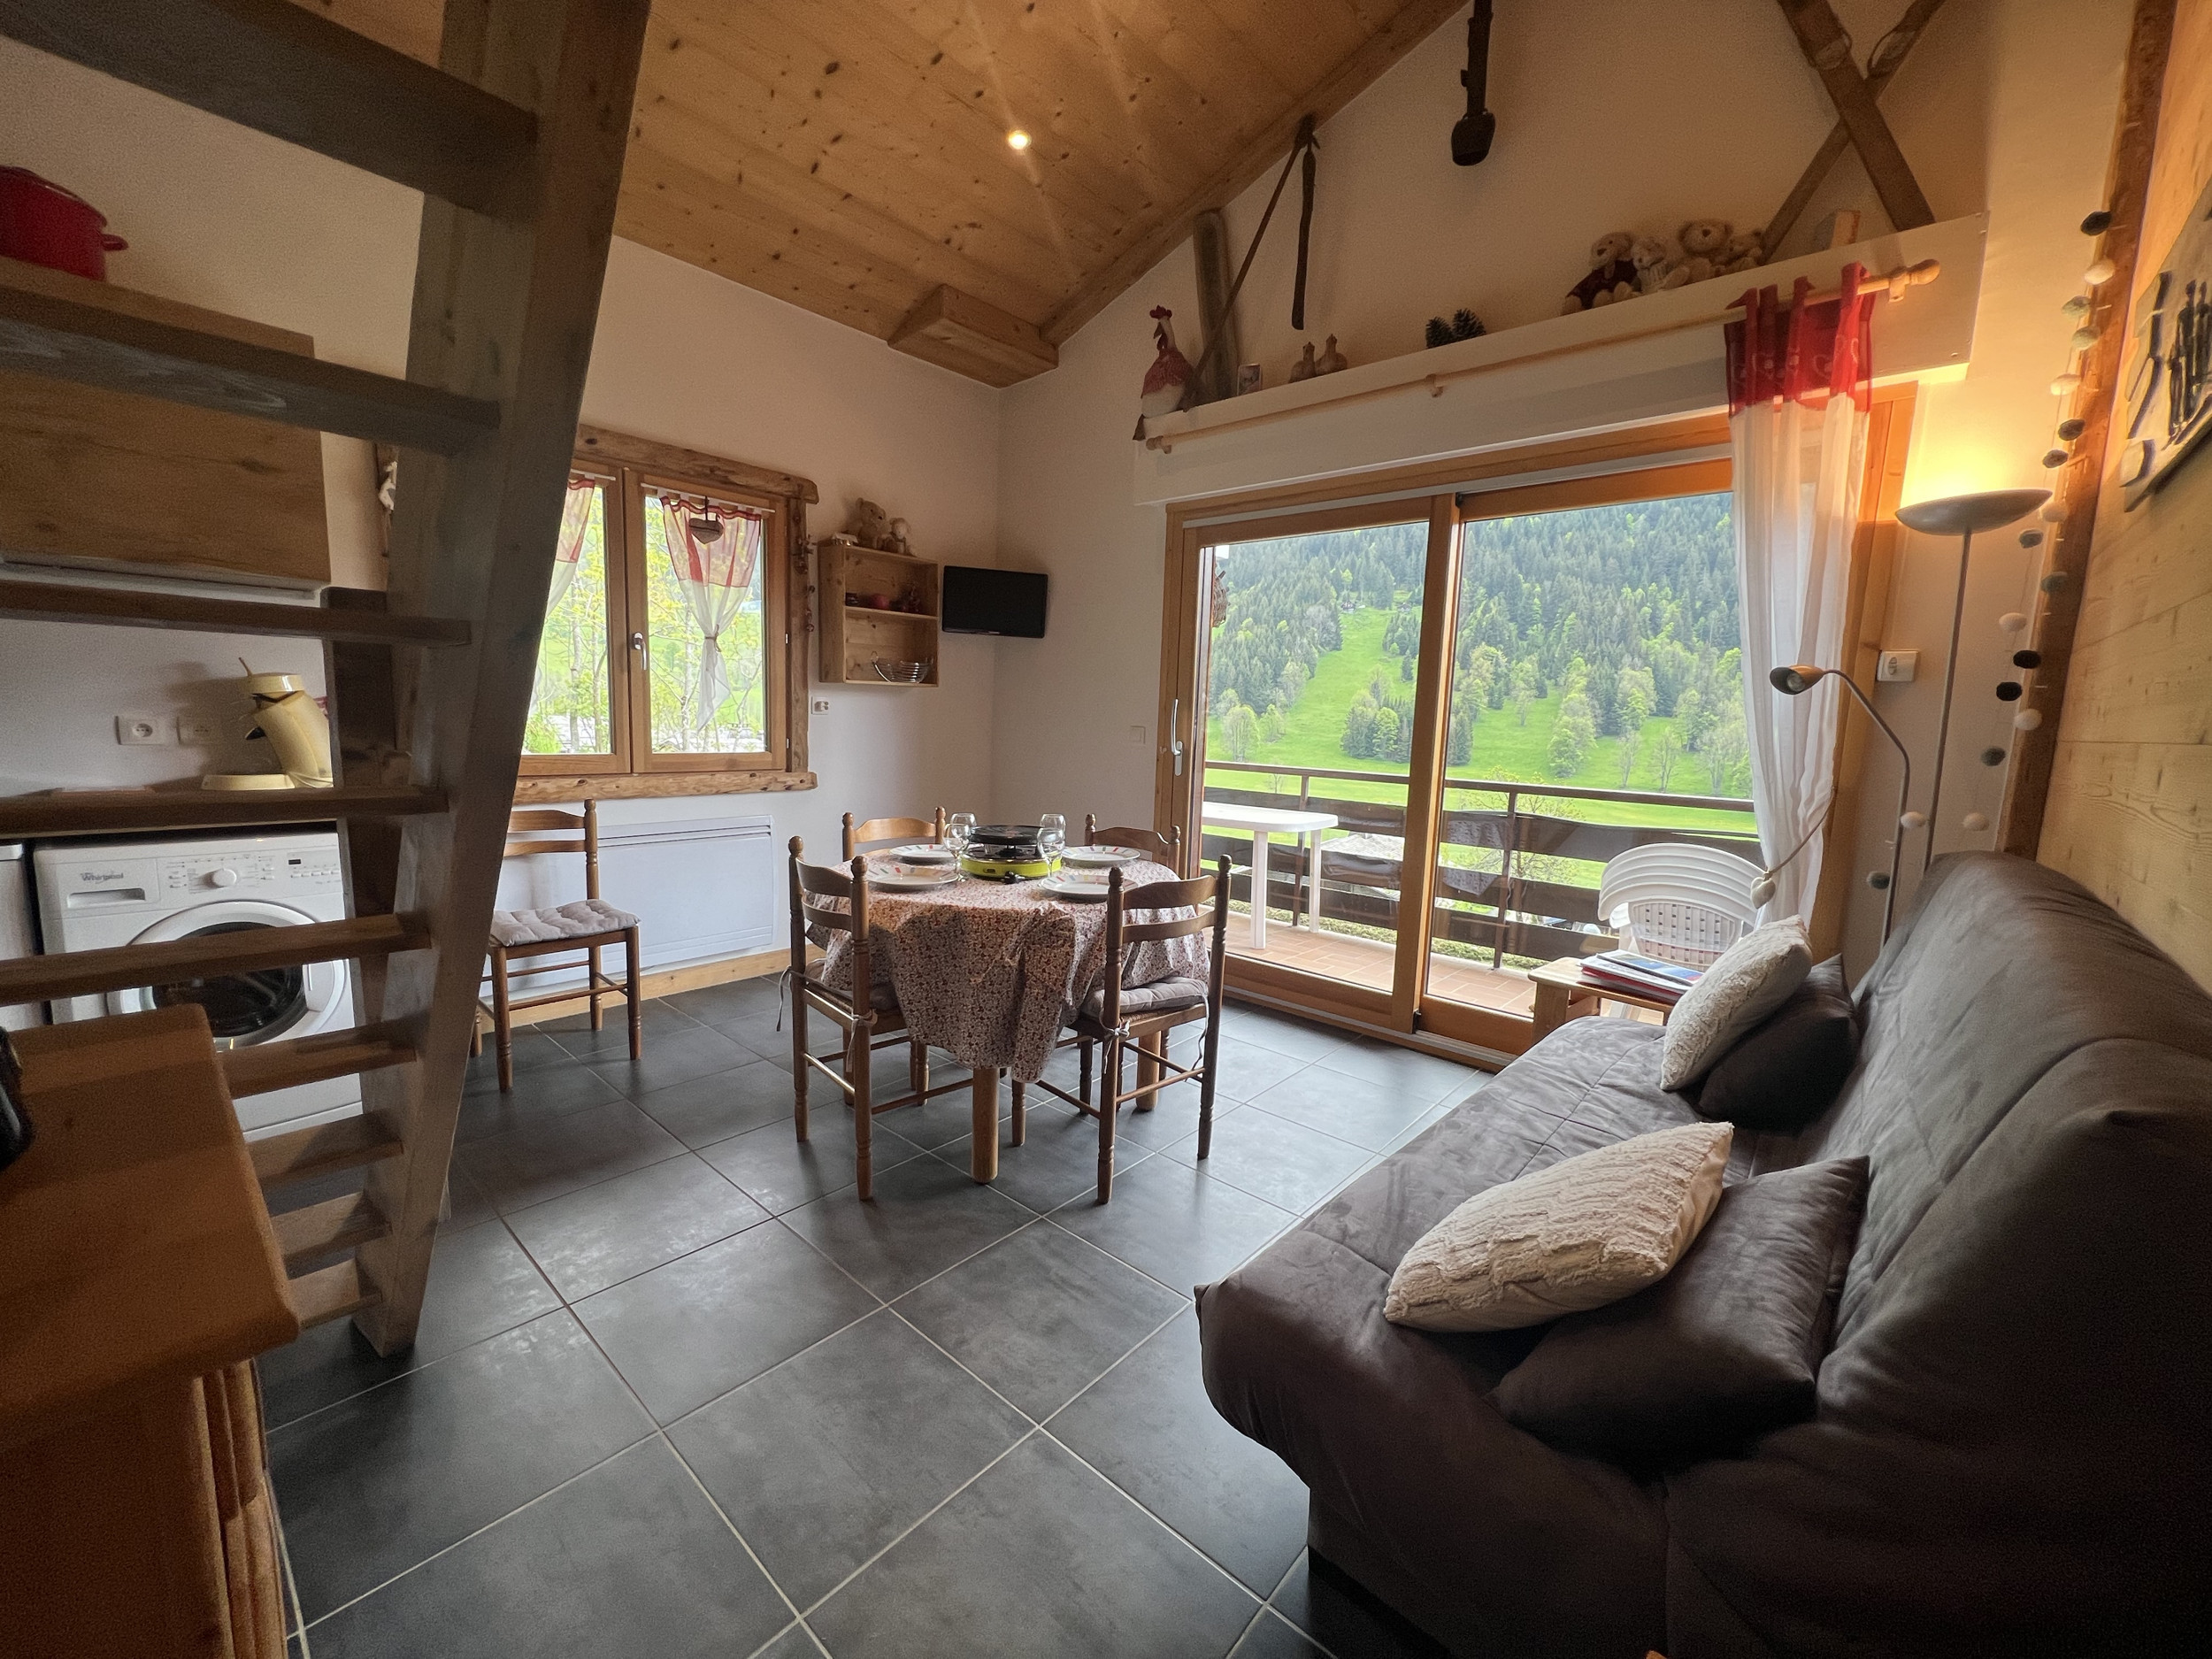  in La Clusaz - Reposire, apartment 8 - 5 pers. directly south